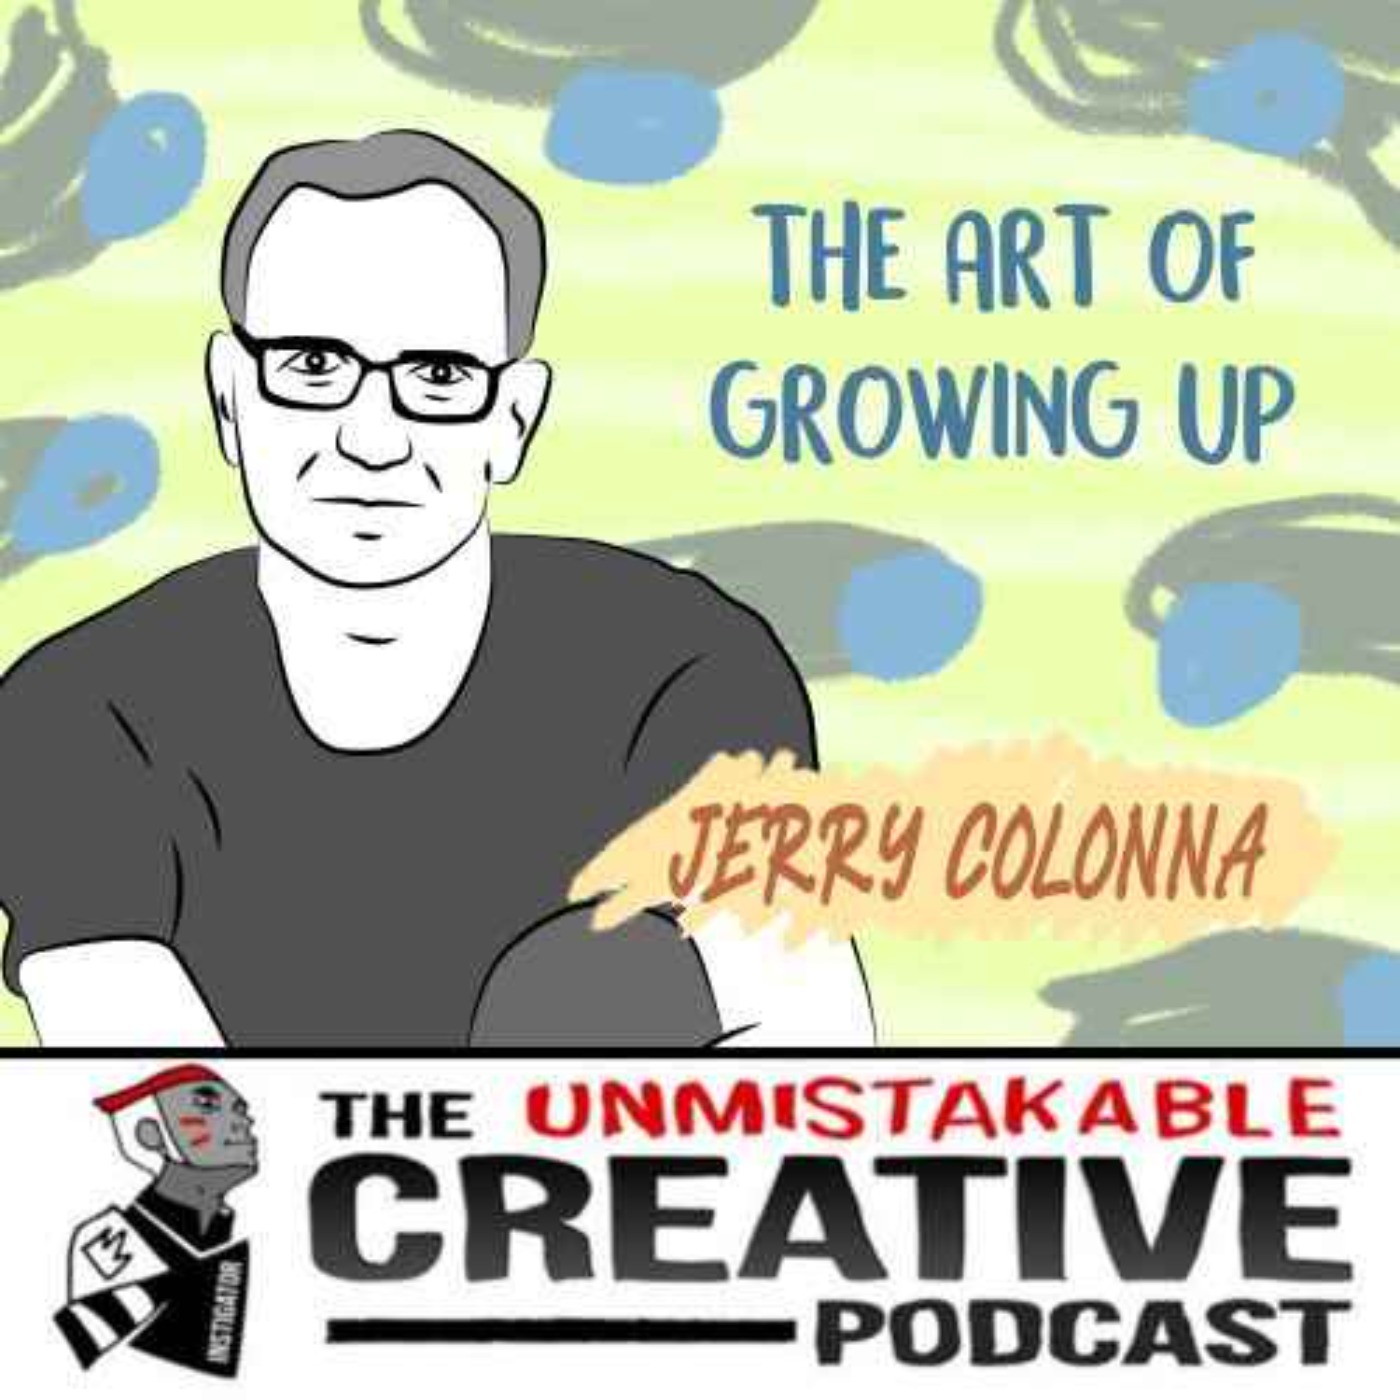 Mental Health Awareness: Jerry Colonna | The Art of Growing Up